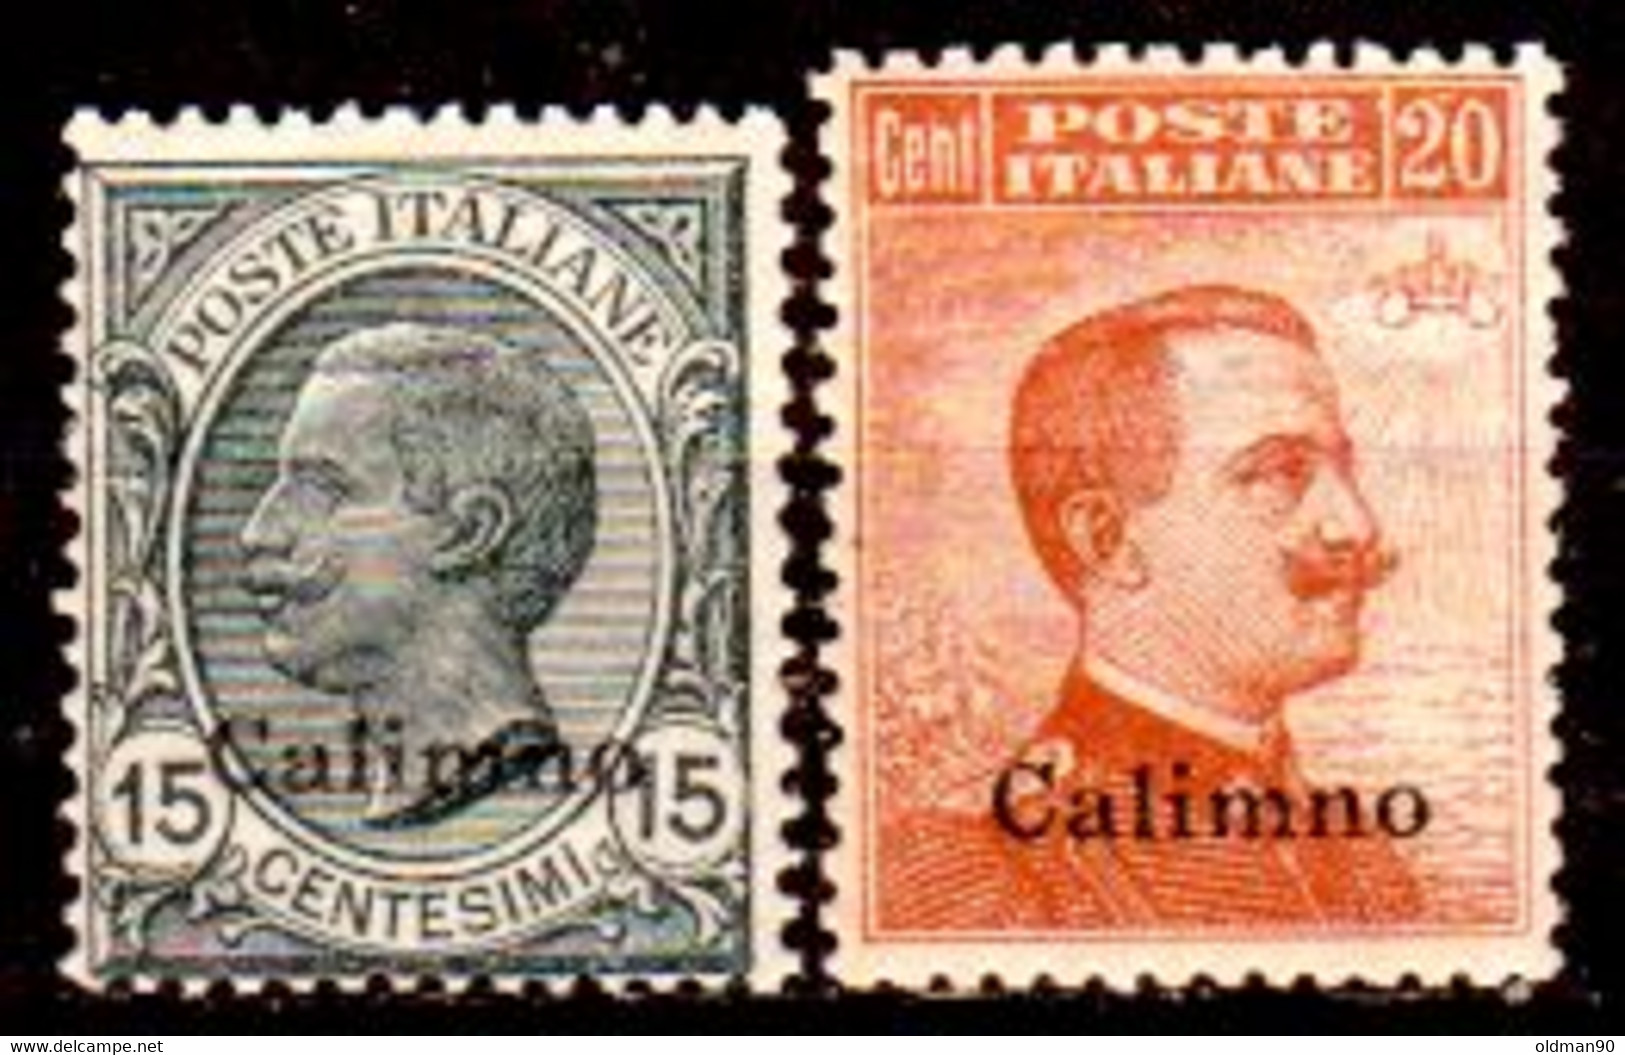 Egeo-OS-265- Calino: Original Stamp And Overprint 1921-22 (++) MNH - Crown Watermark - Quality In Your Opinion. - Egée (Calino)